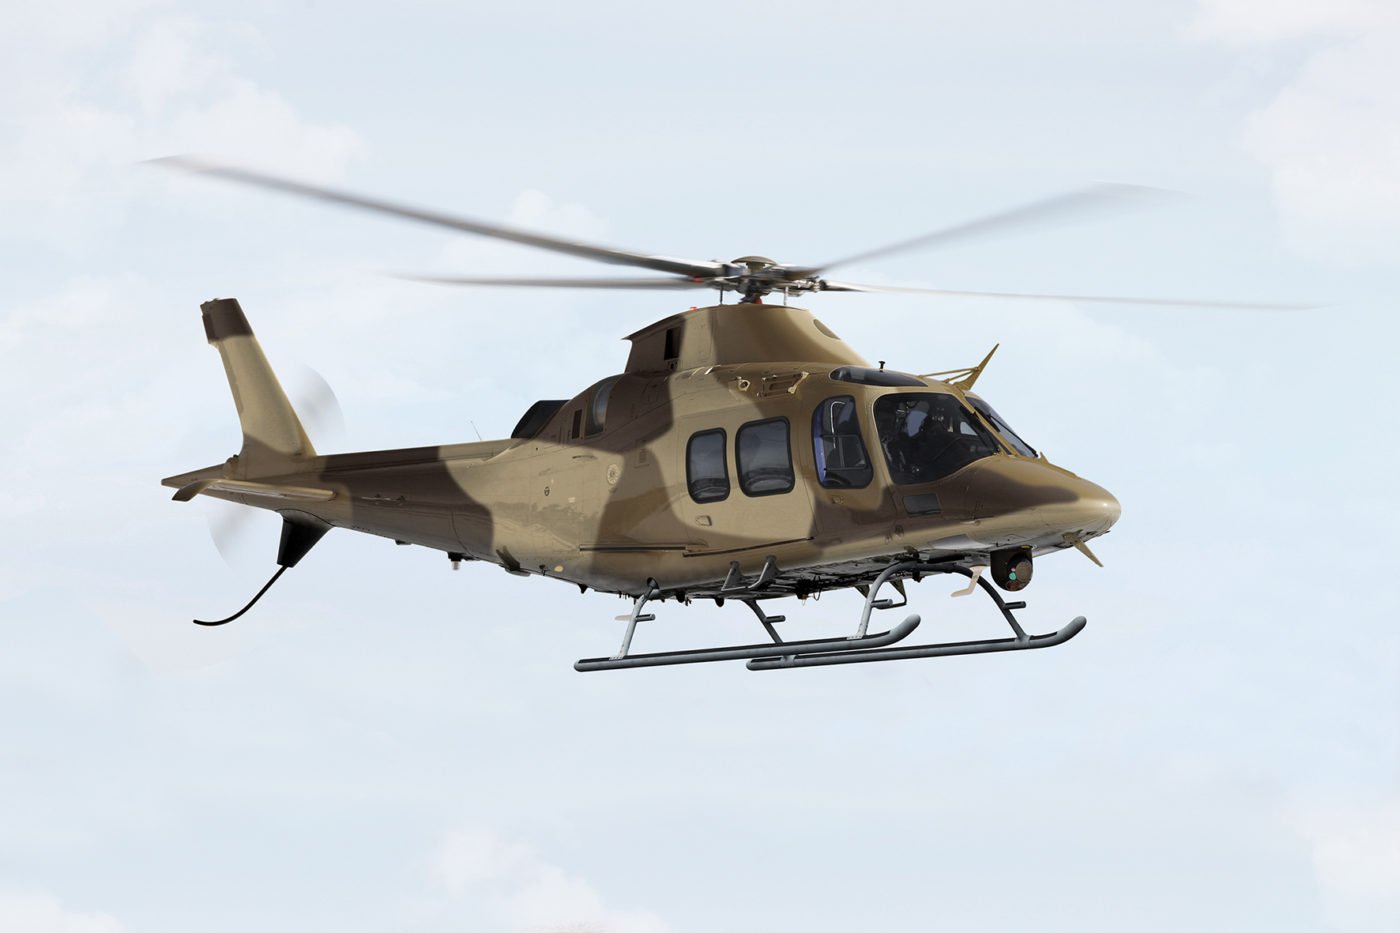 The AW109 Trekker is equipped with skid landing gear and a state-of-the-art fully integrated glass cockpit.